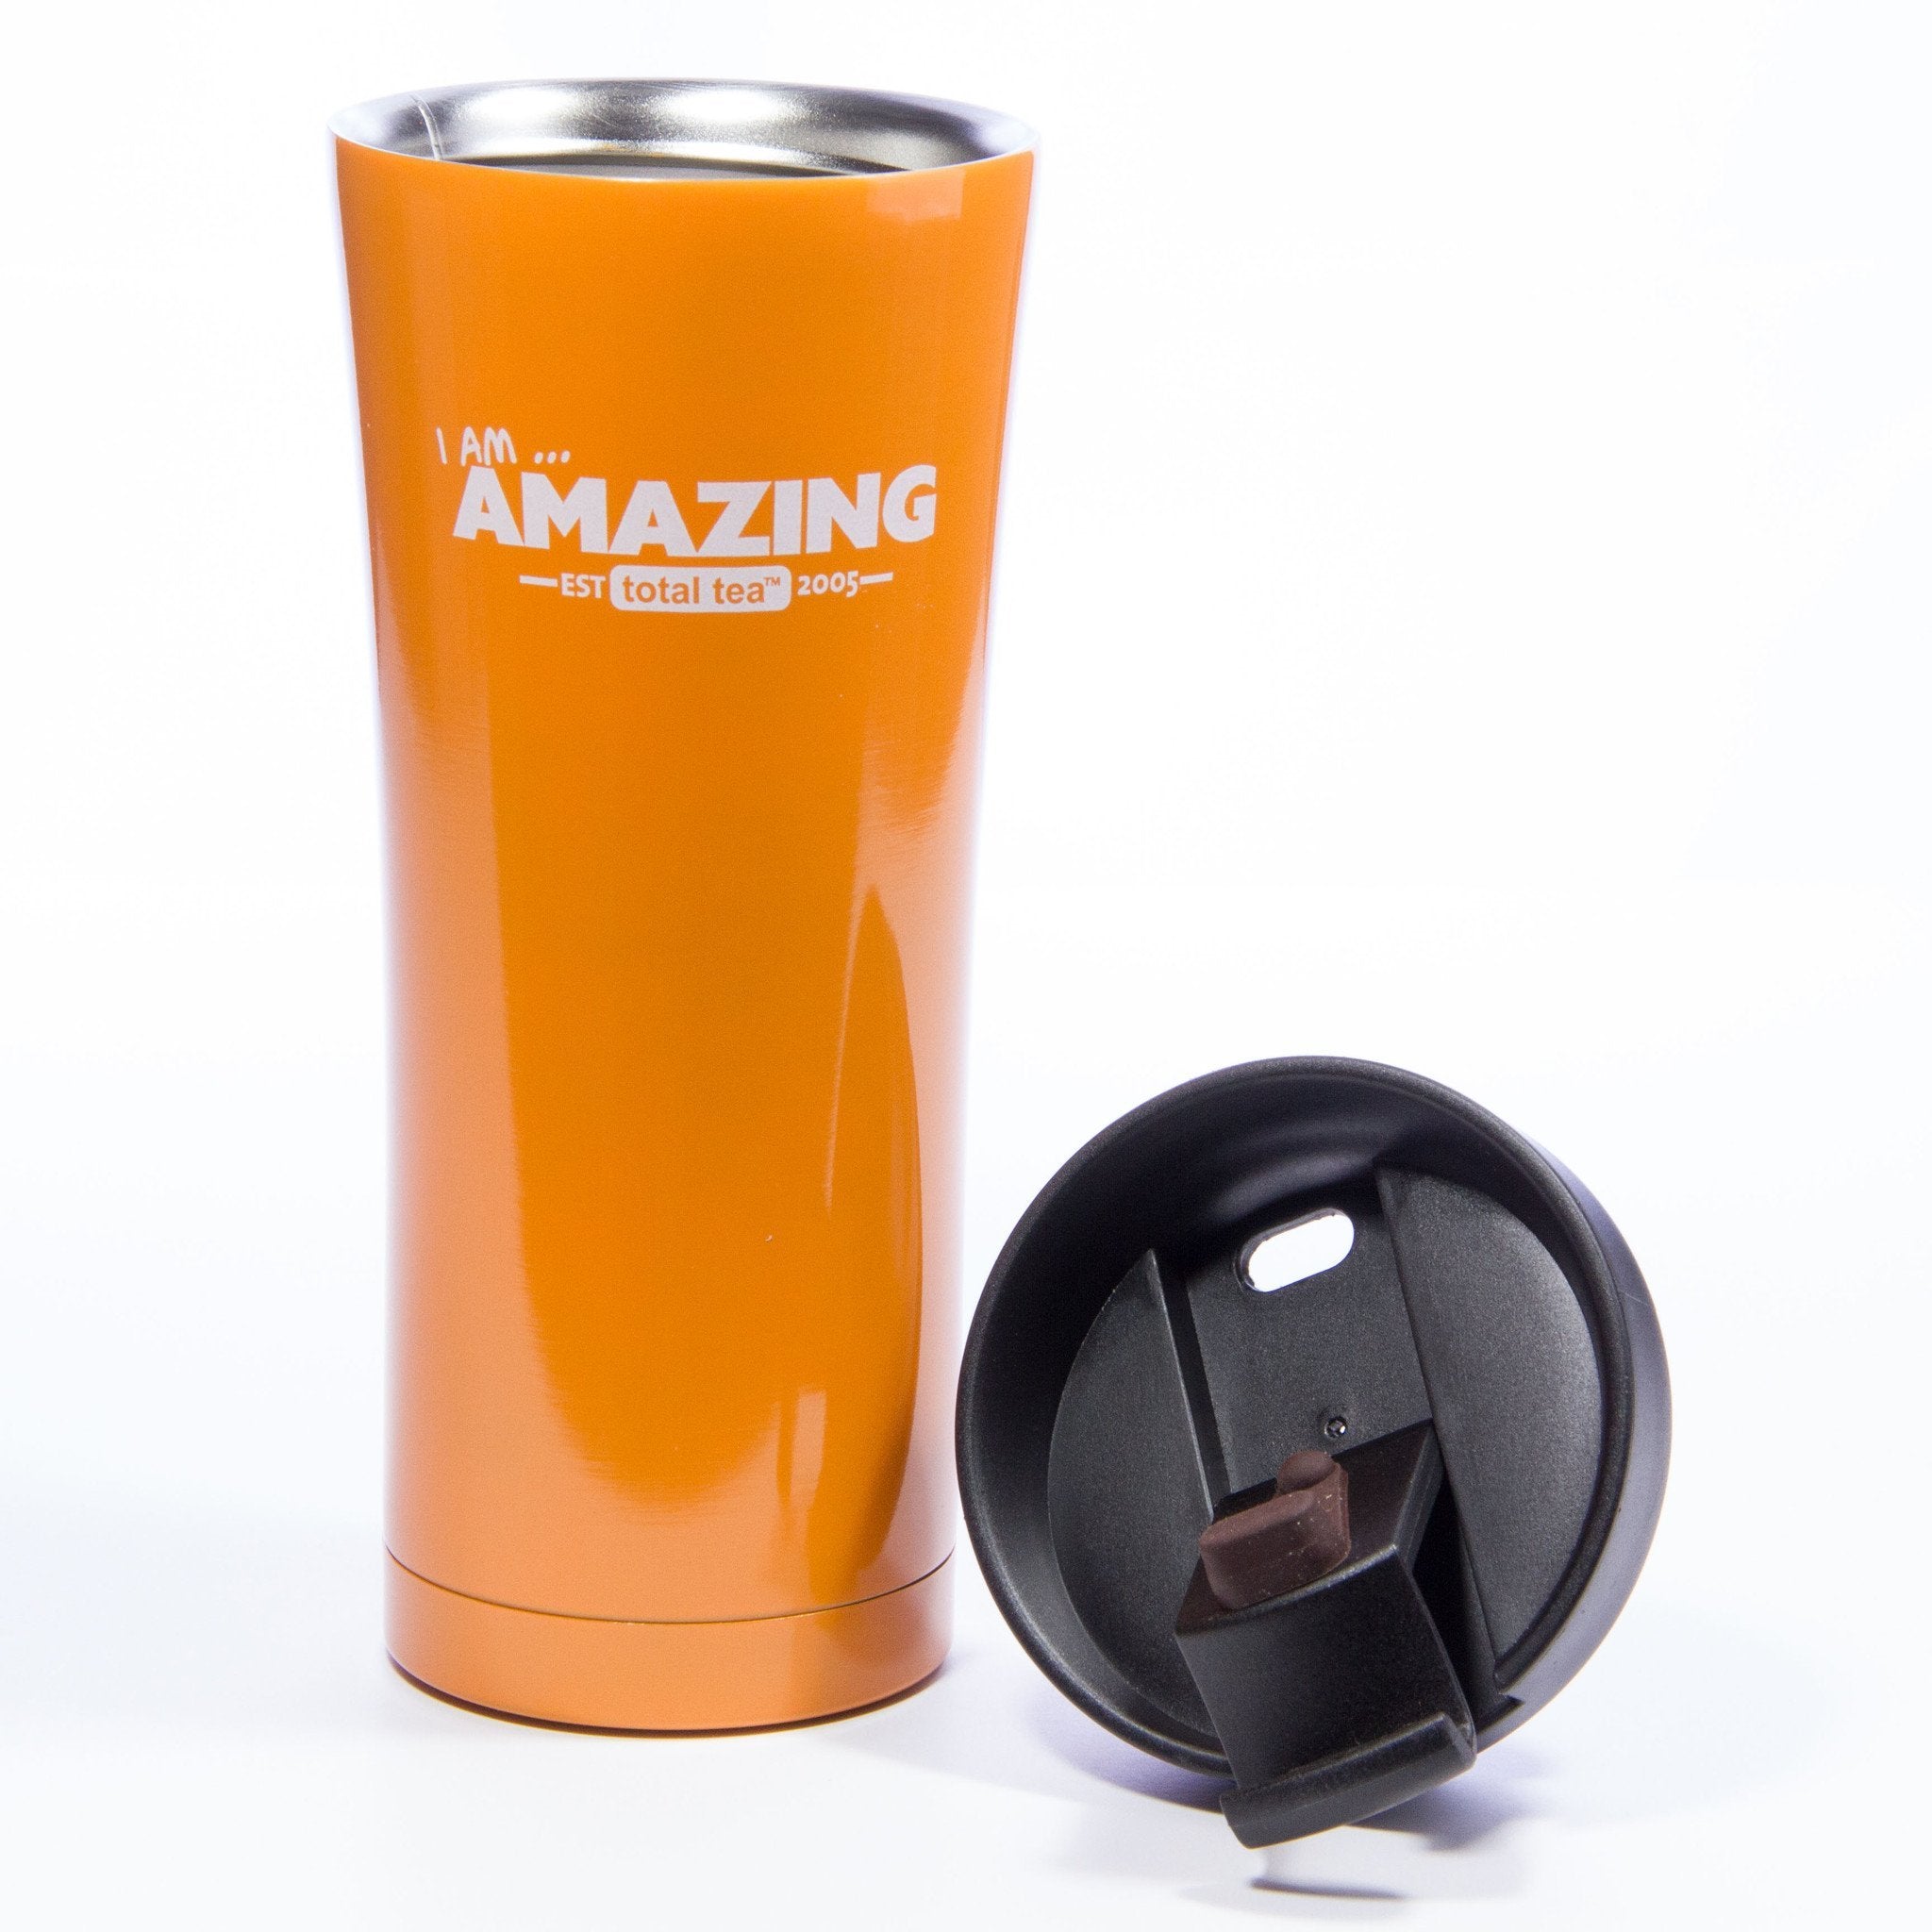 Thermos Stainless Steel Cone 17 Oz, Tumbler, Mug, Glass, Bottle